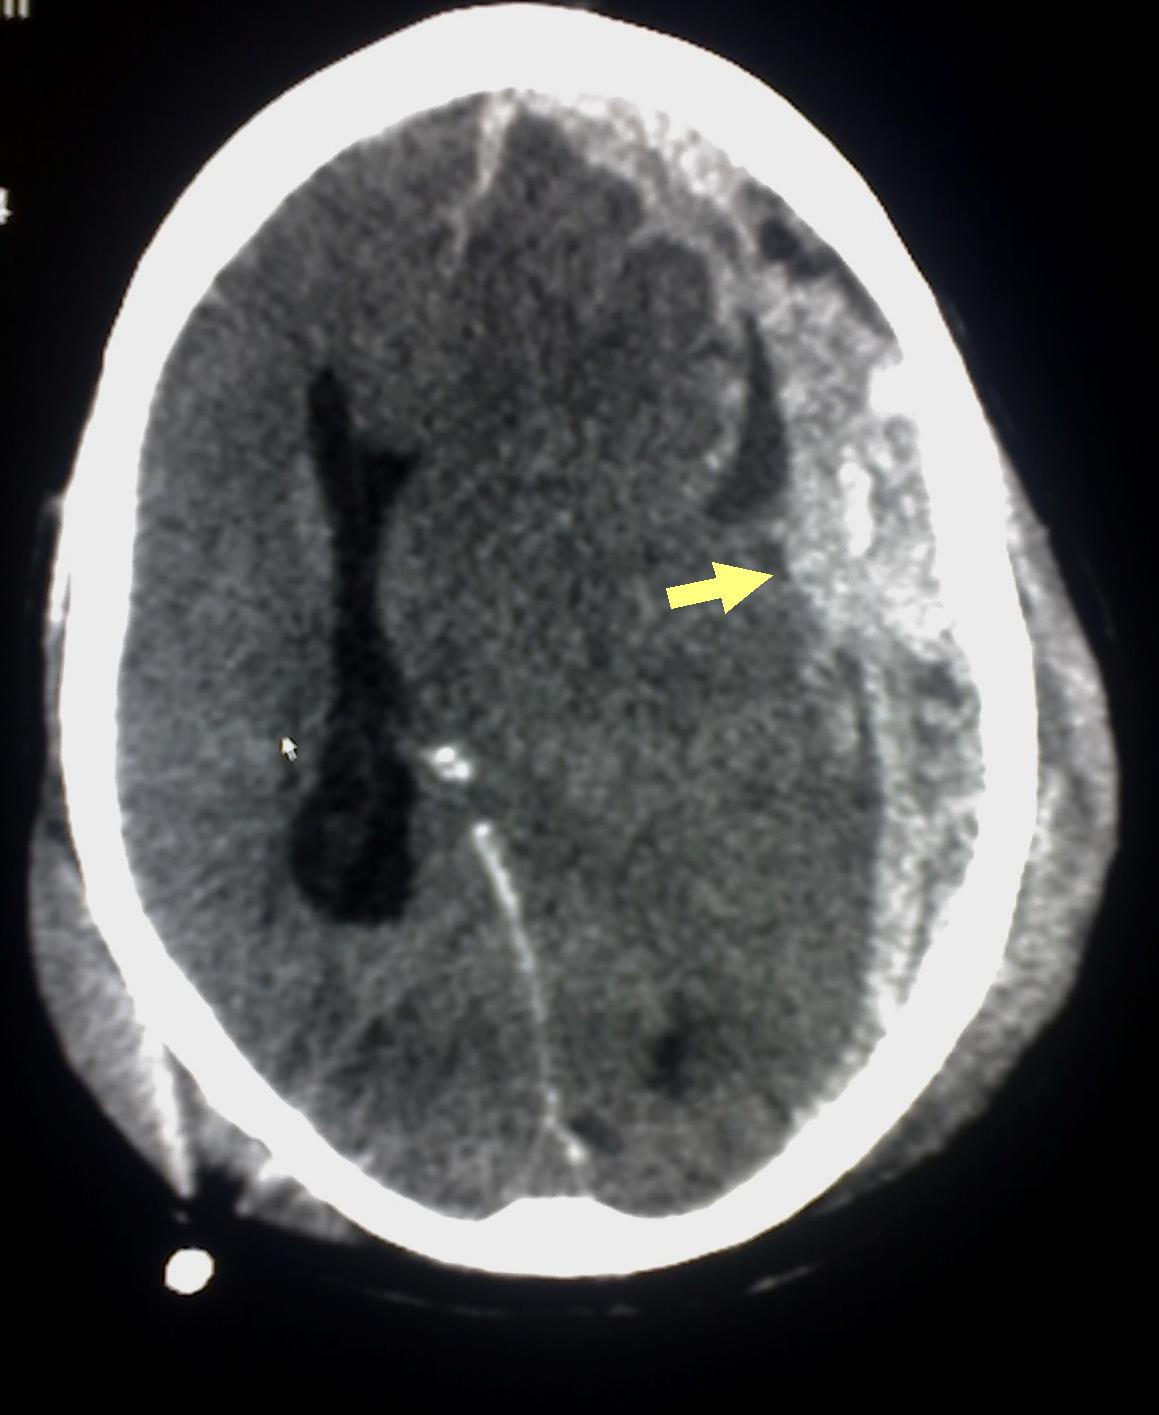 Abusive Head Trauma/Shaken Baby Syndrome/Subdural hematoma (arrow), bleeding between the dura mater of the meninges and the brain, commonly occurs in SBS/Abusive head trauma.